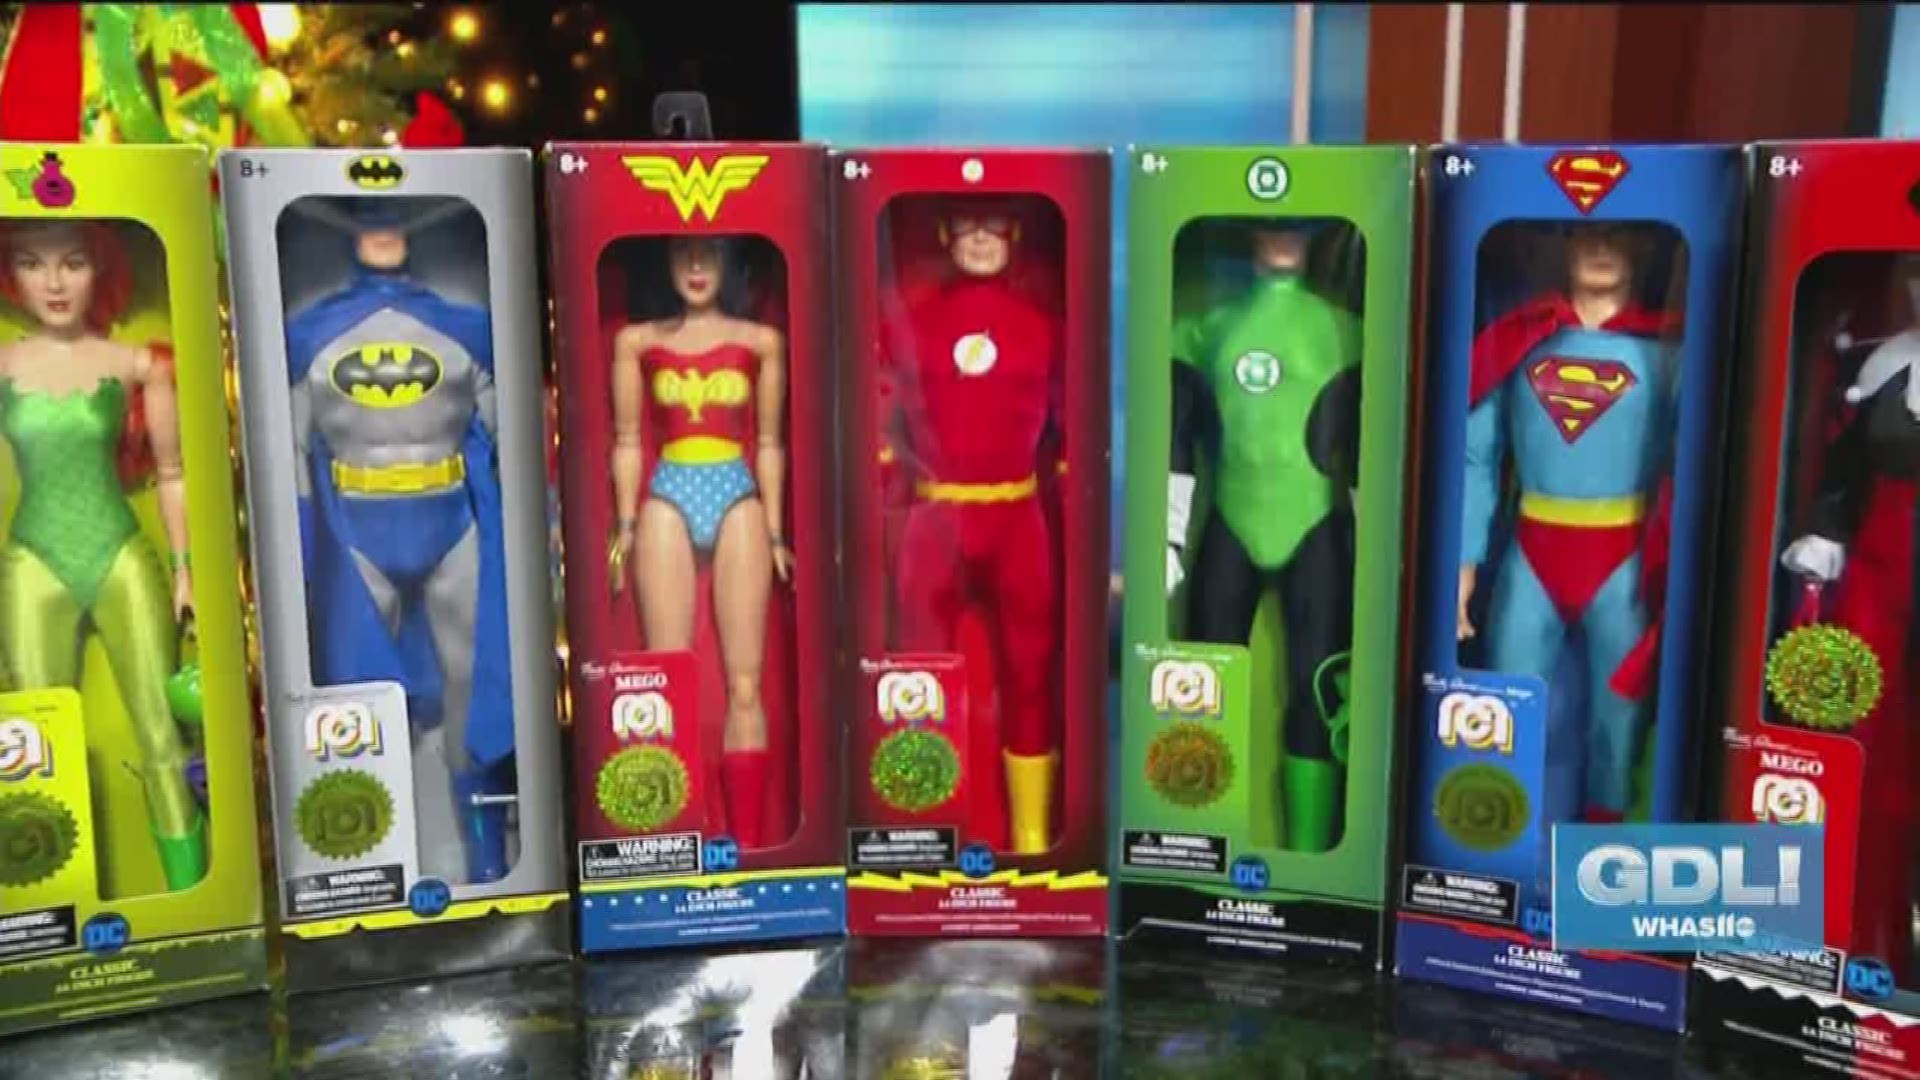 Marty Abrams of Mego Corporation stopped by Great Day Live with lots of toys. The company recently made a comeback and has reissued some beloved favorites.